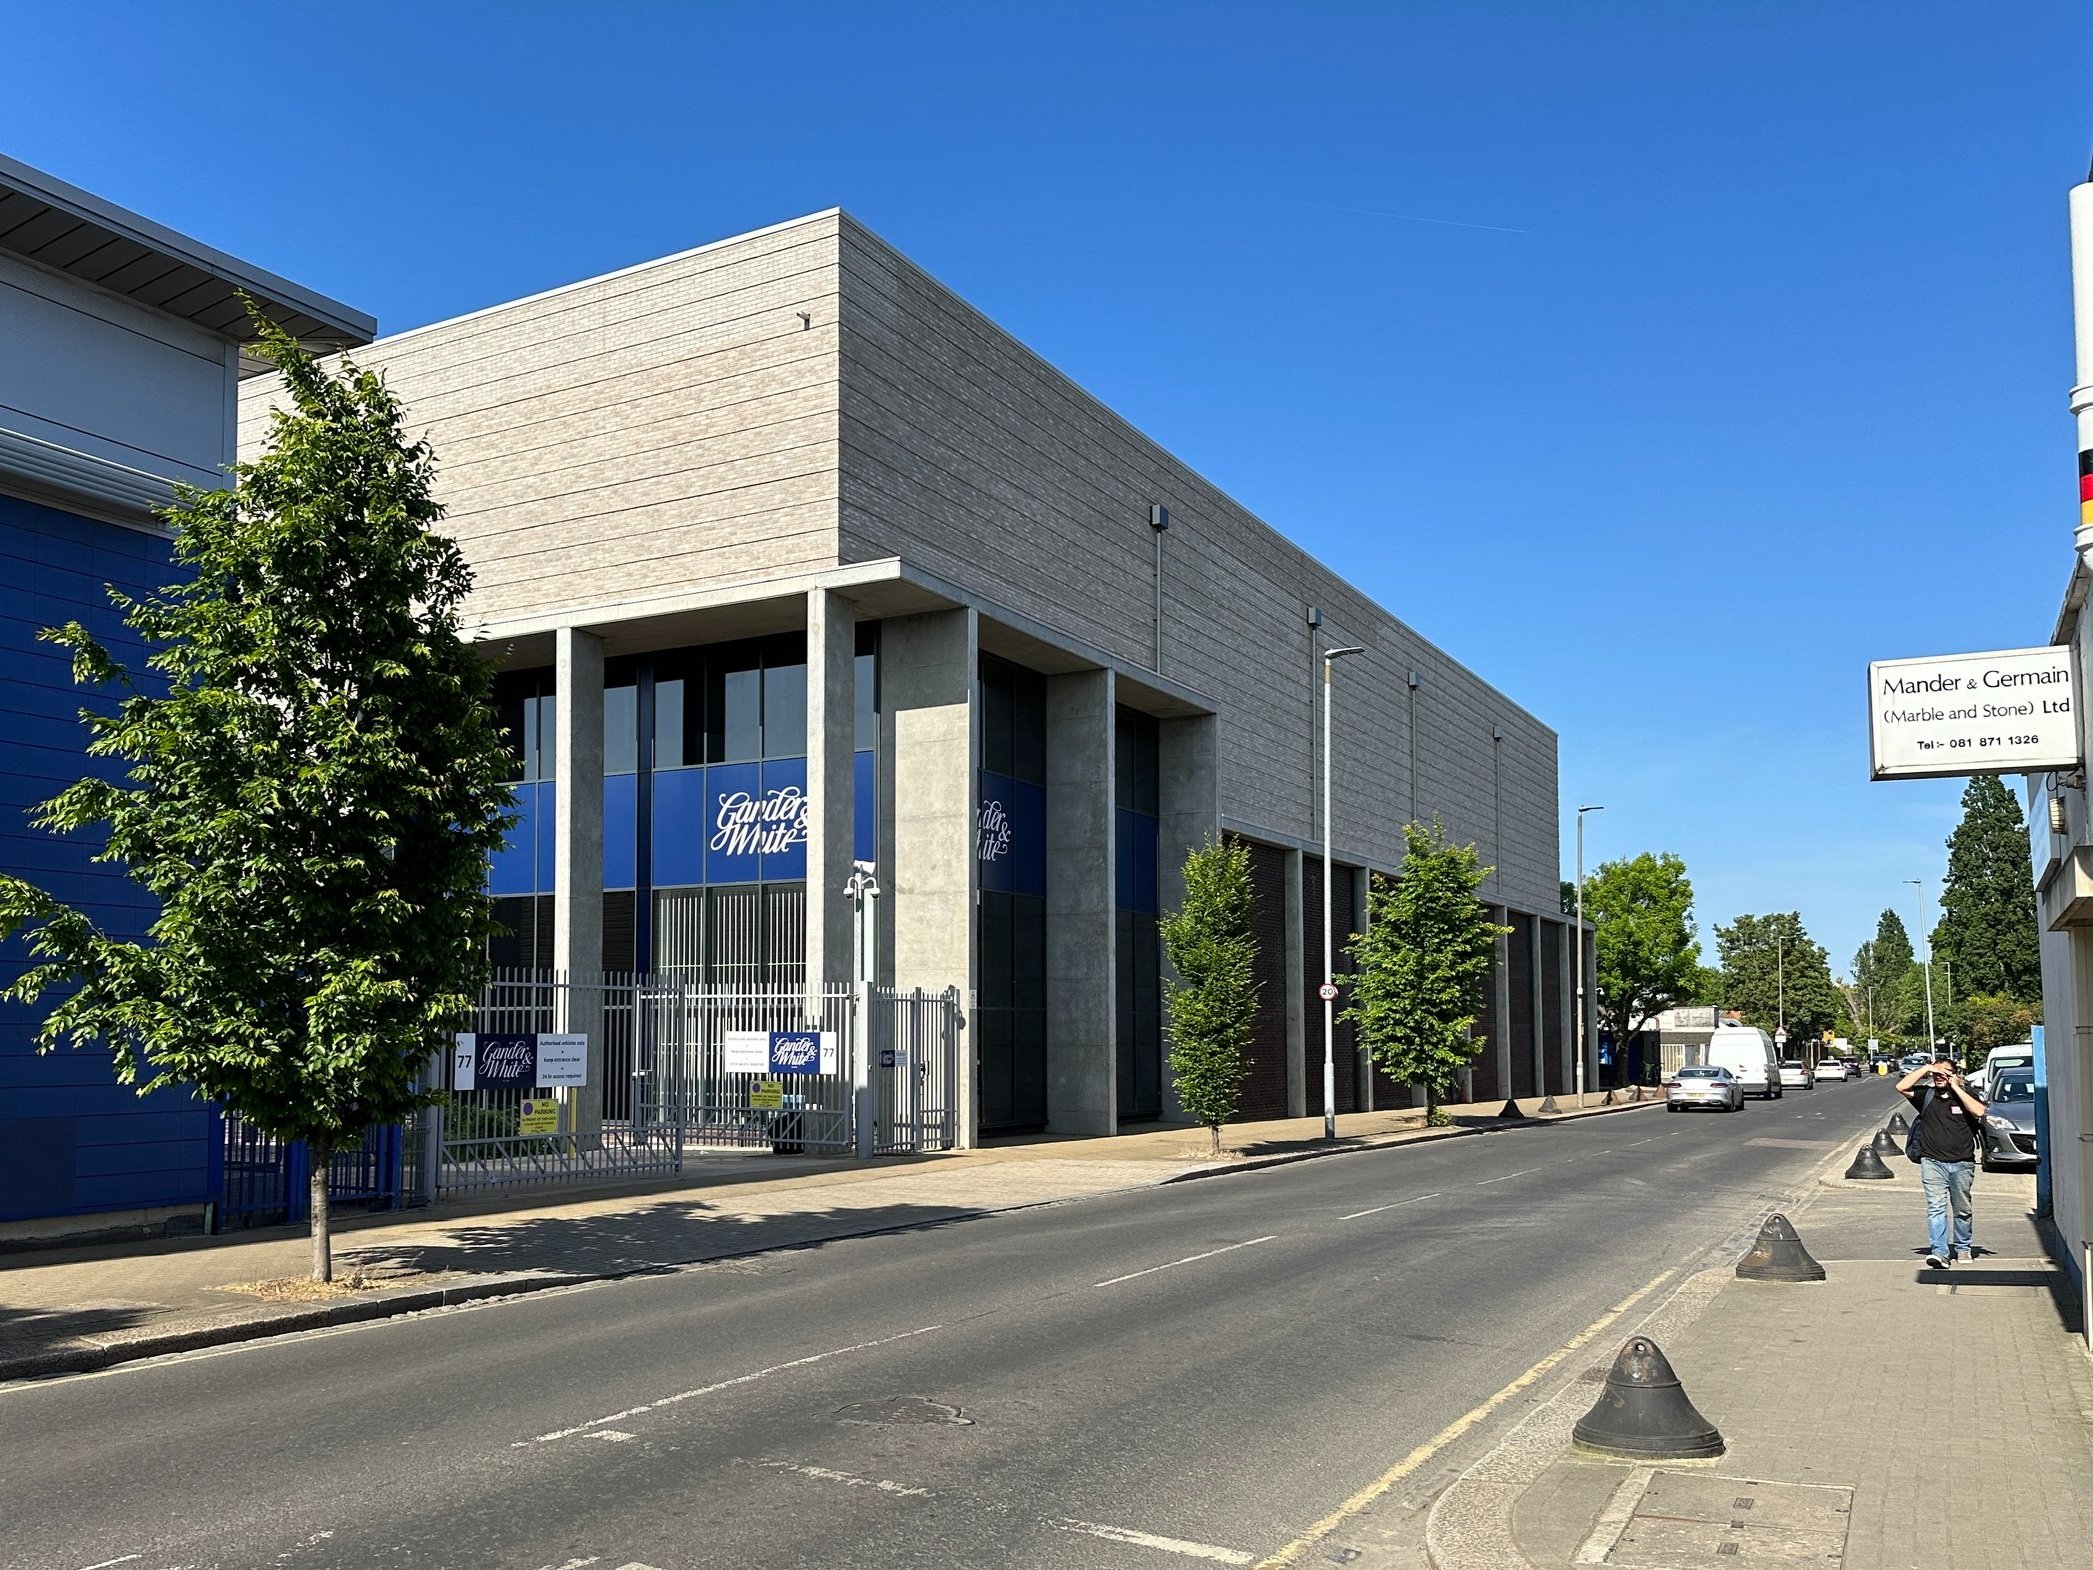 01_Thumbnail_Industrial_Commercial_Storage_Wandsworth_Streetview.jpg